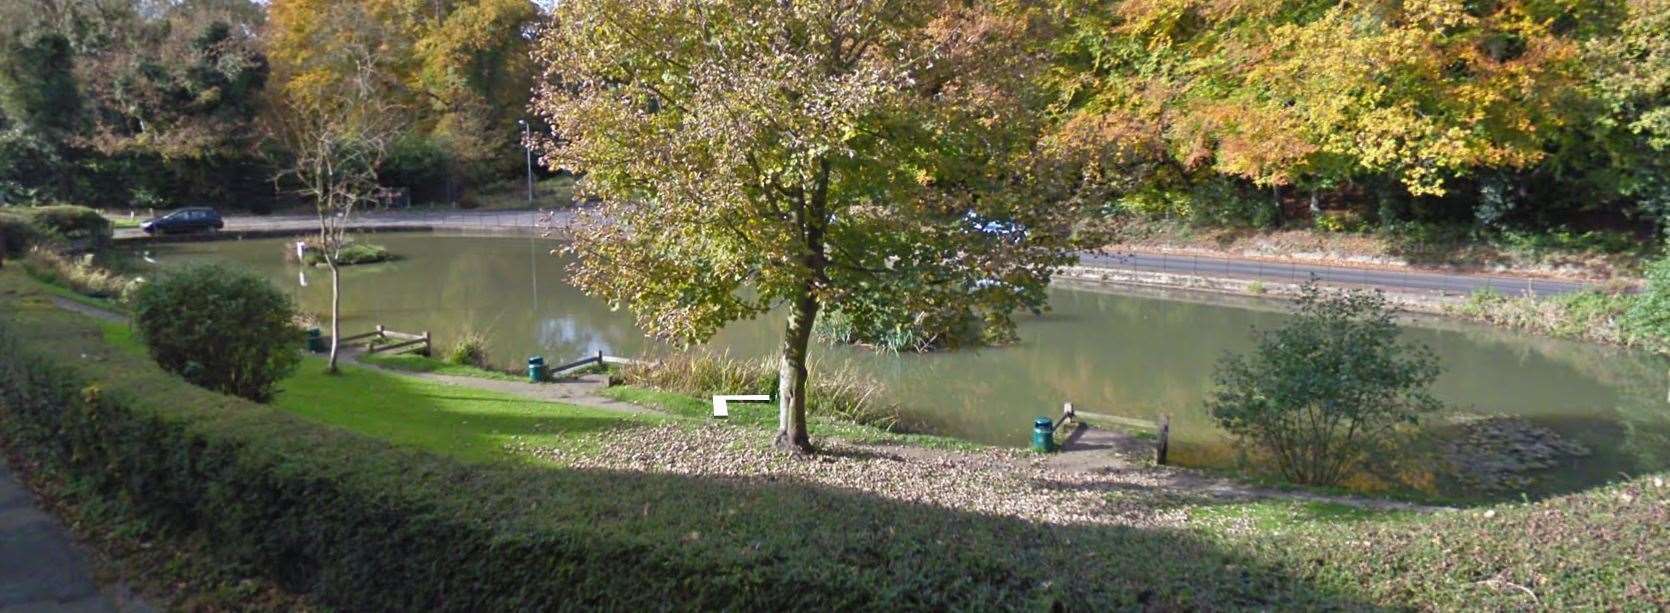 Holden Pond at Southborough. Pic Google